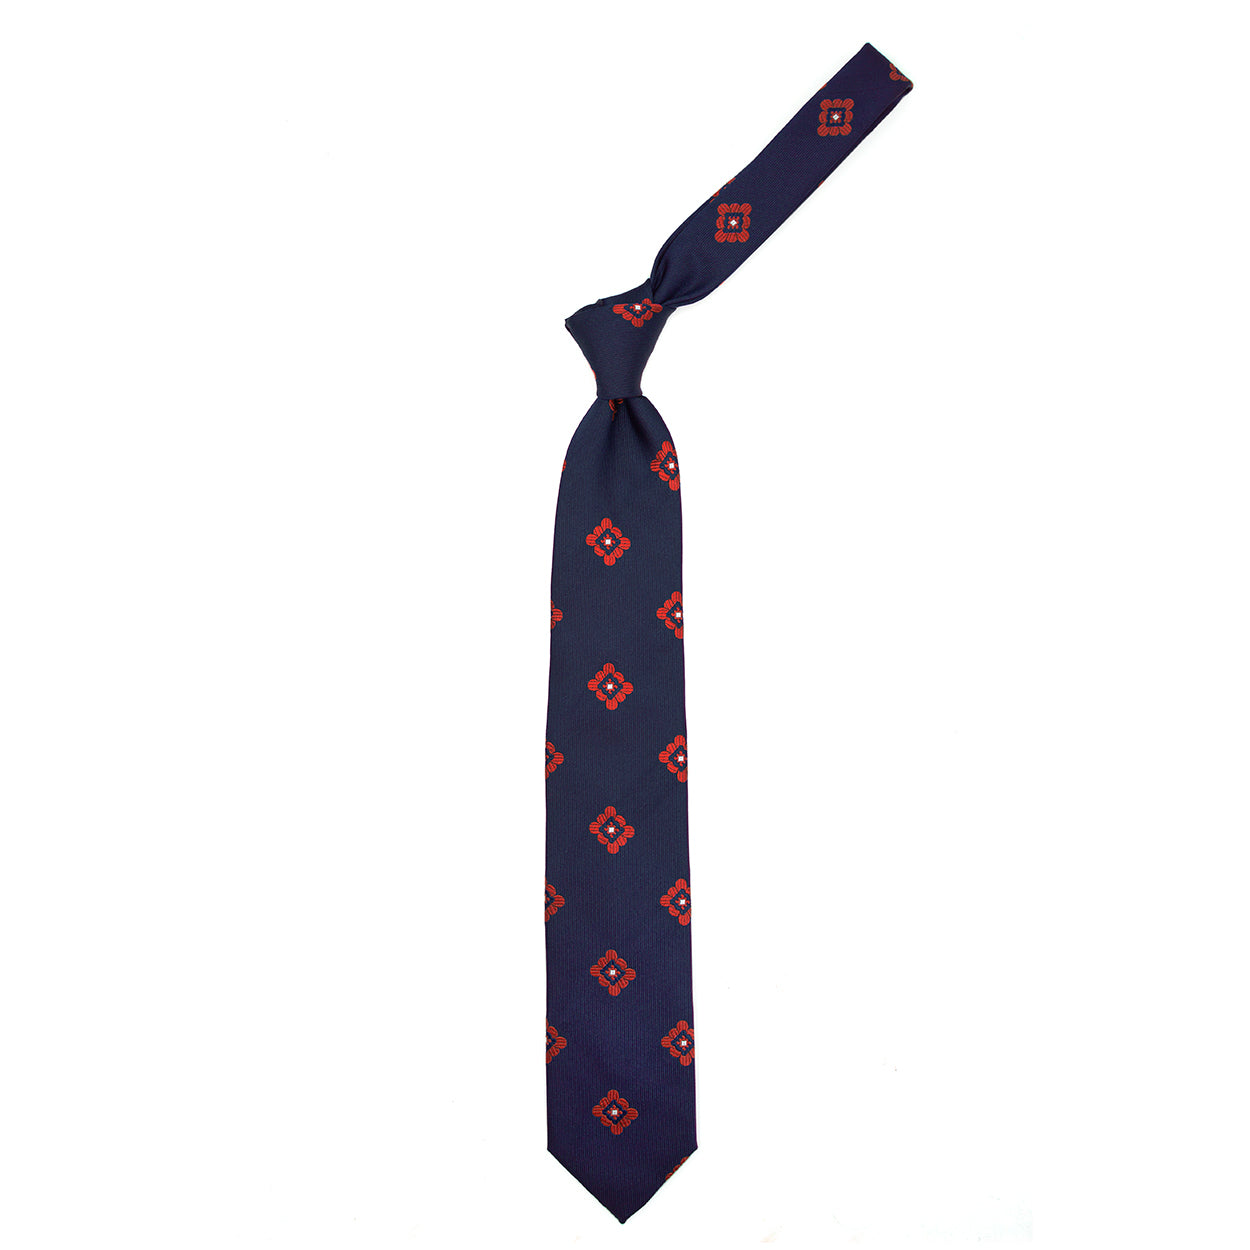 Blue tie with red flowers